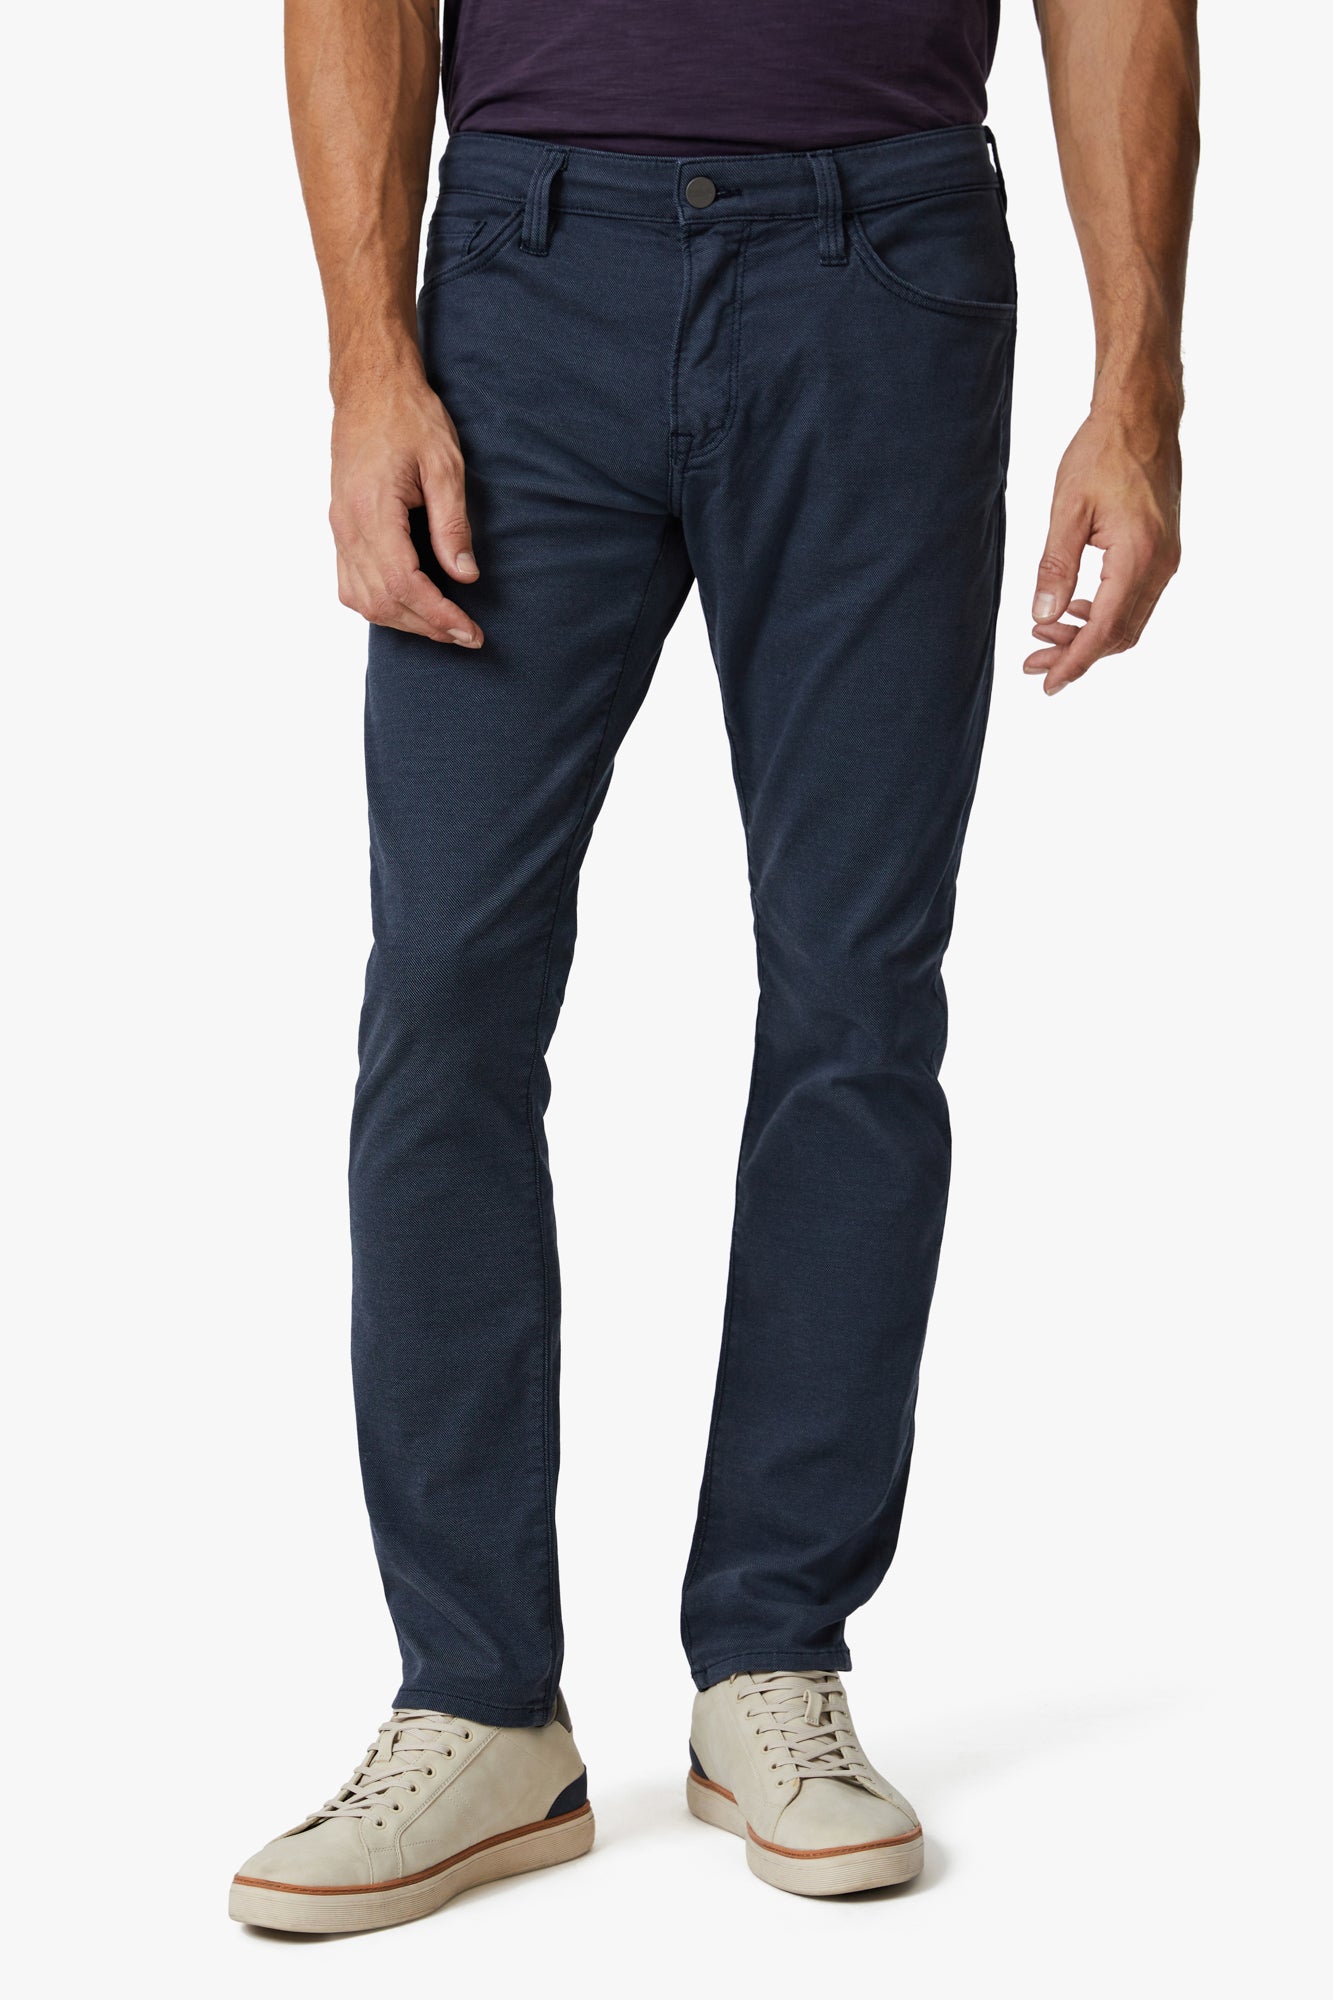 Cool Tapered Leg Pants In Navy CoolMax Image 2